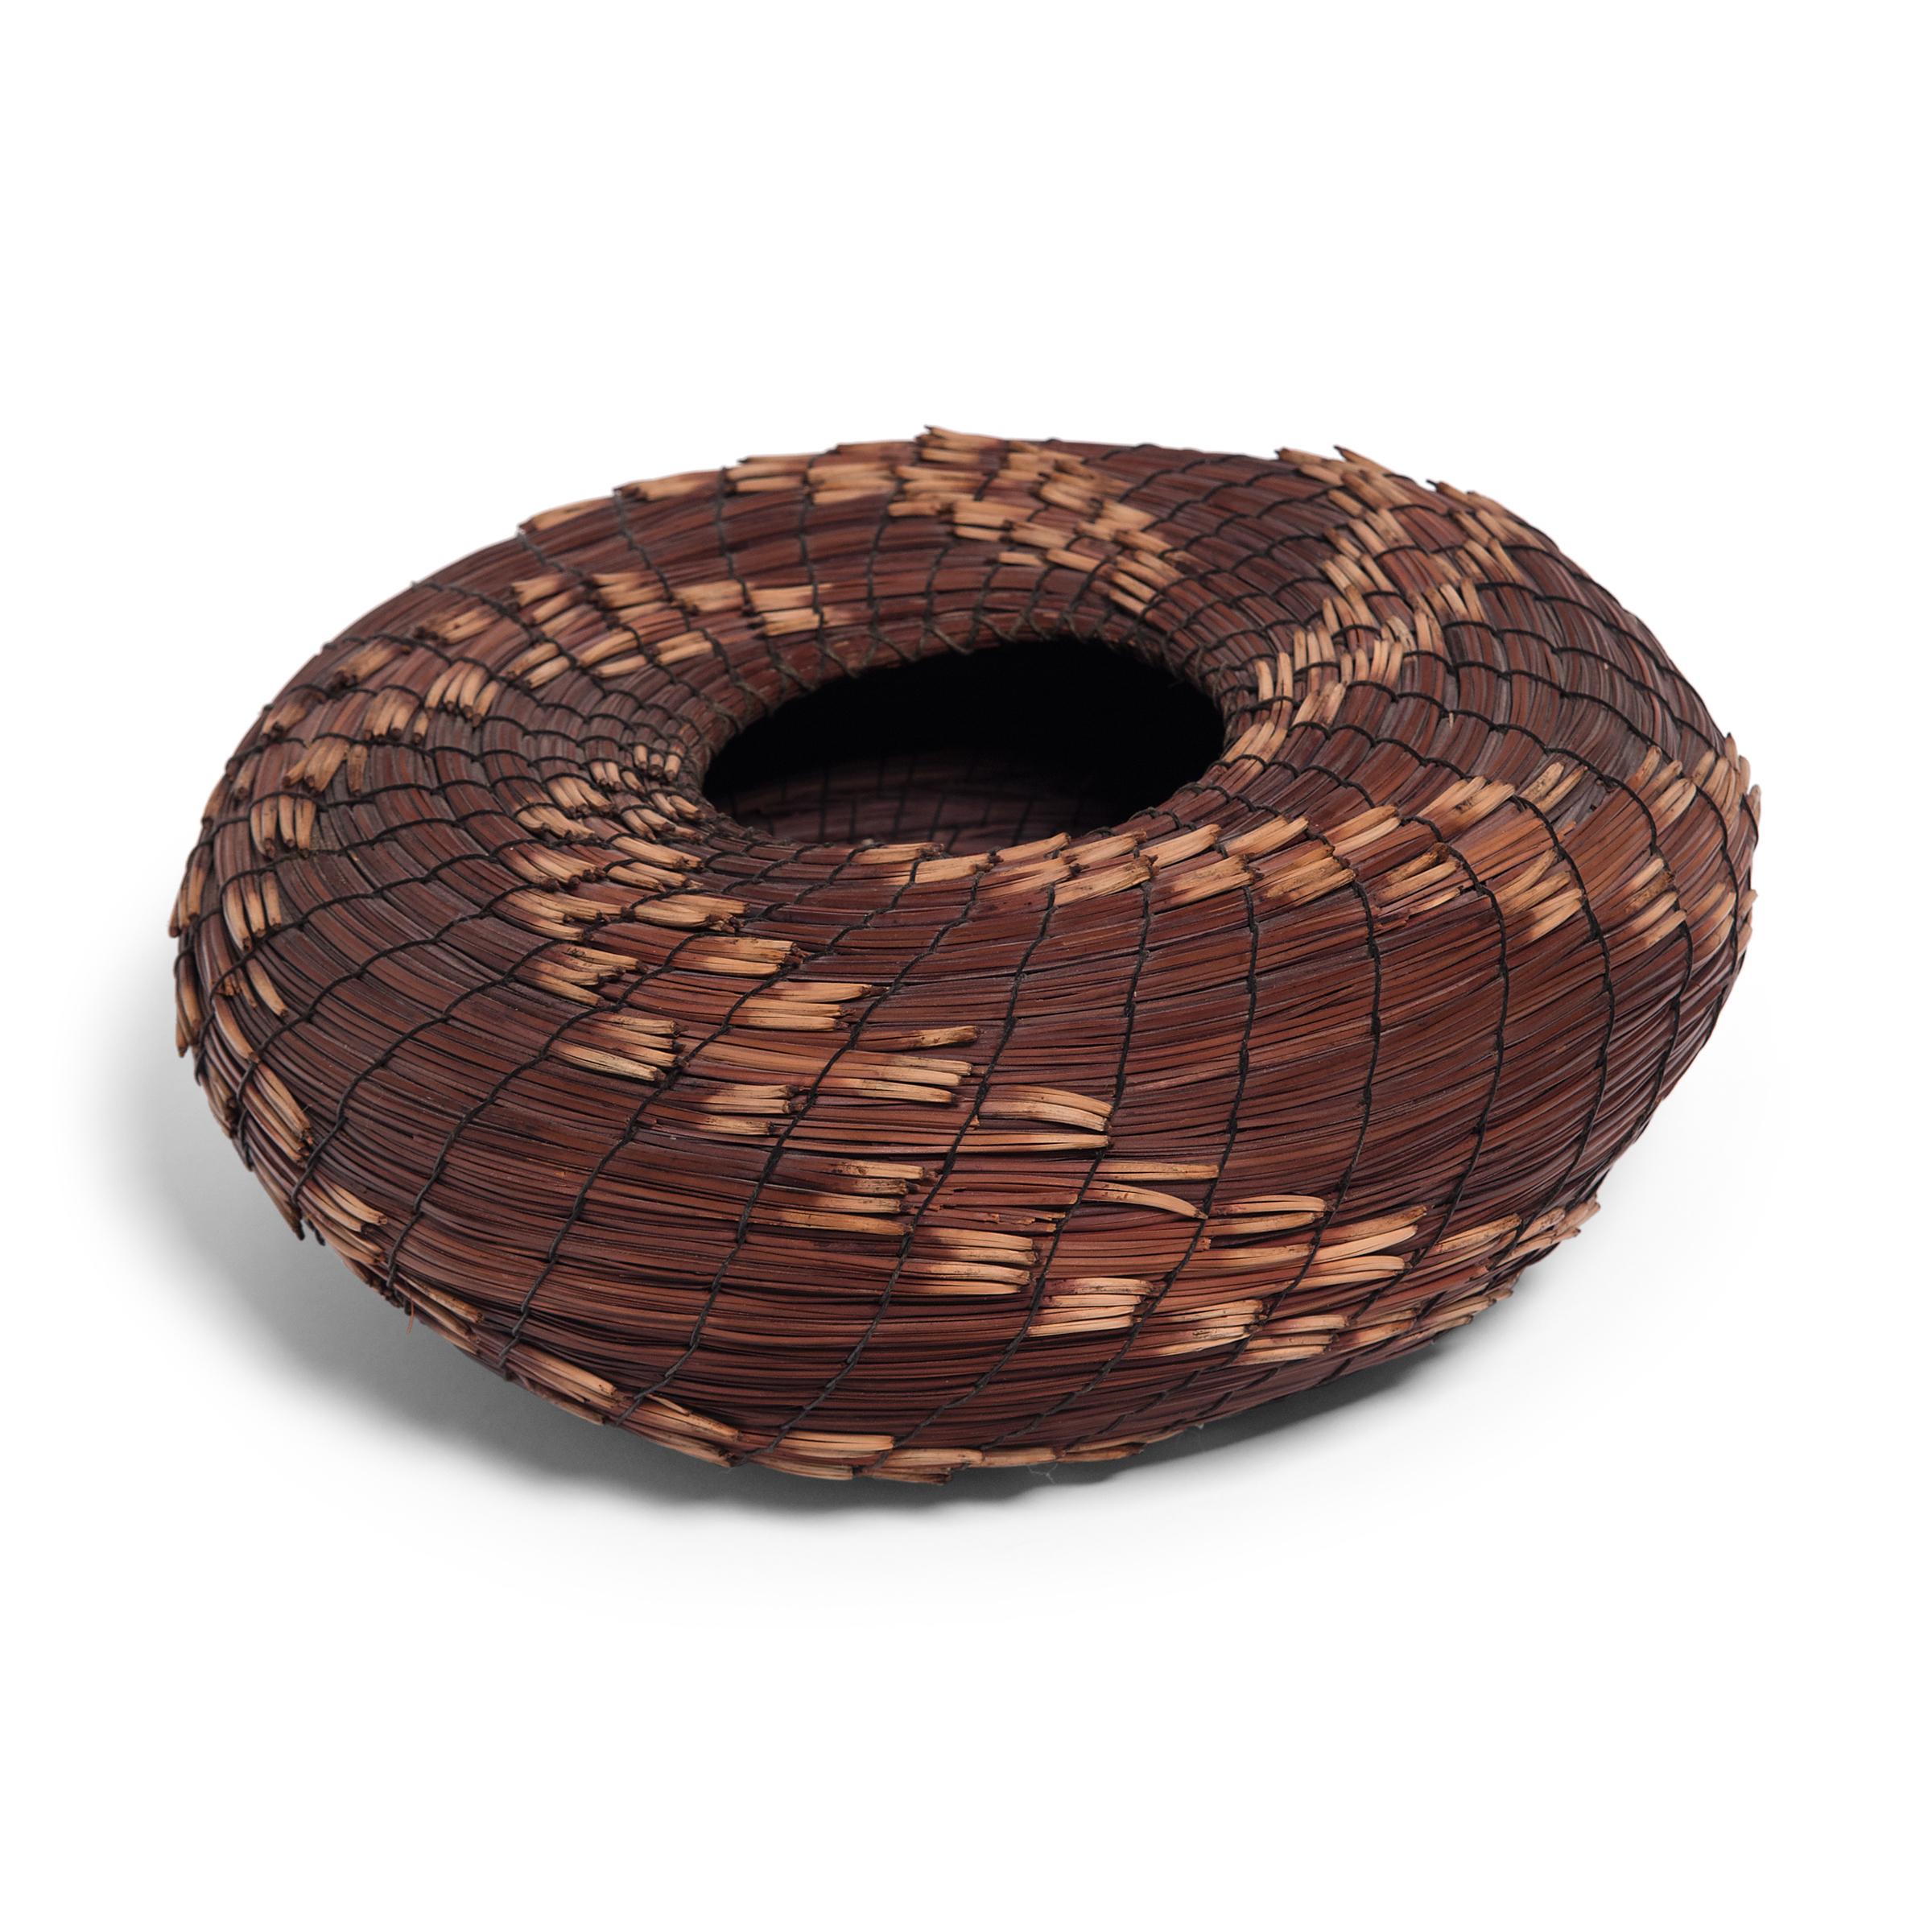 A fantastic example of contemporary folk art, this spiral-form basket is attributed to American artists Fran and Neil Prince, who created sculptural works throughout the late 20th century and specialized in working with fallen Torrey Pine needles.